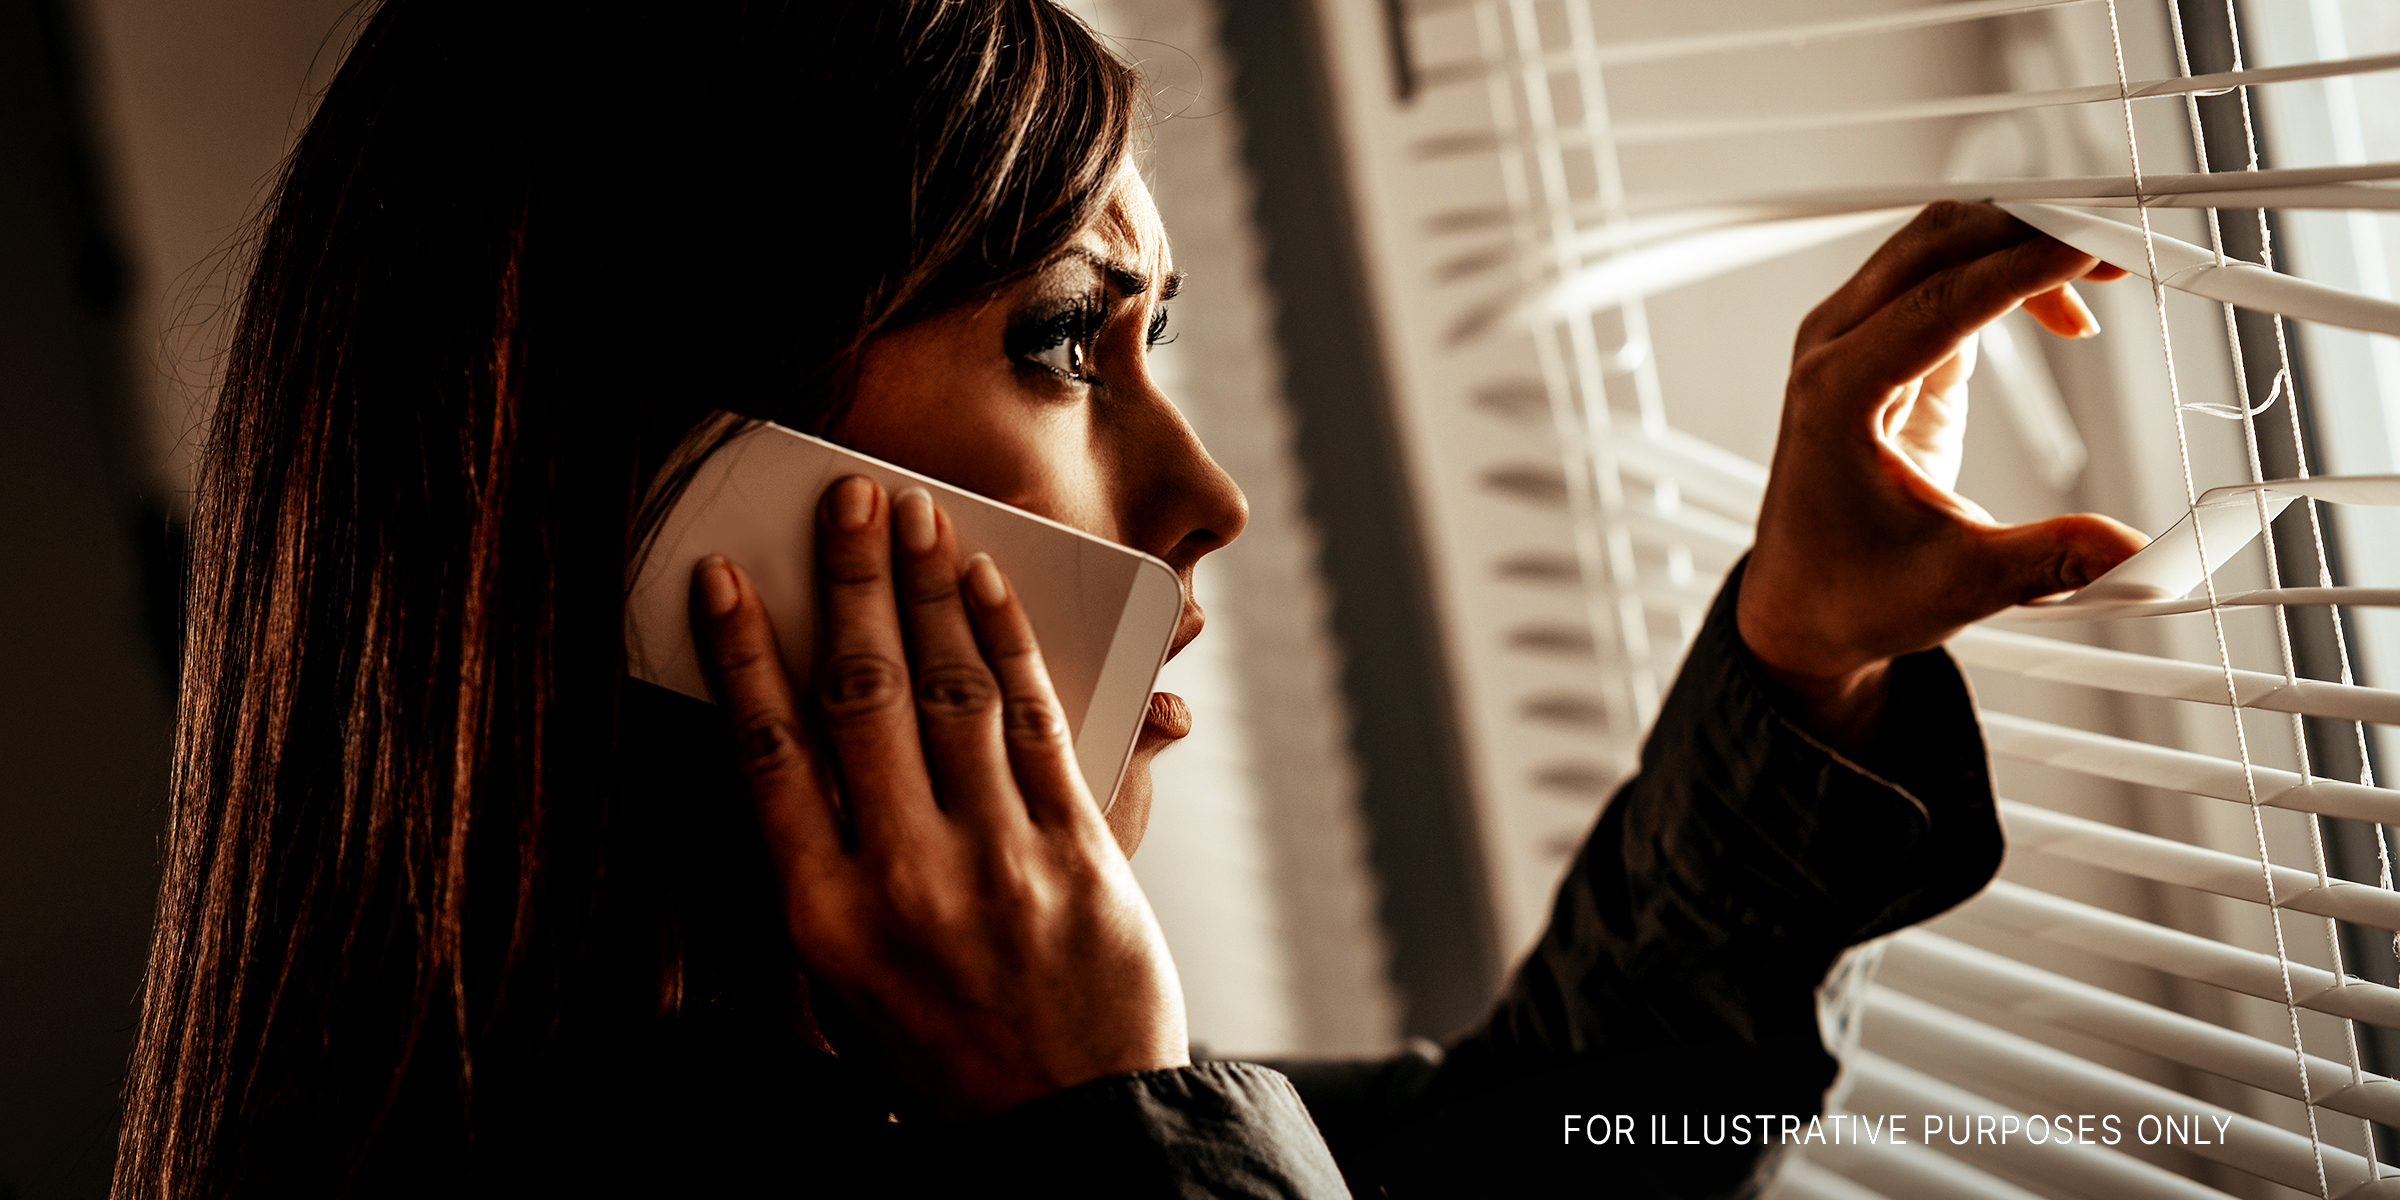 A woman looking out the window while holding her phone | Source: Shutterstock